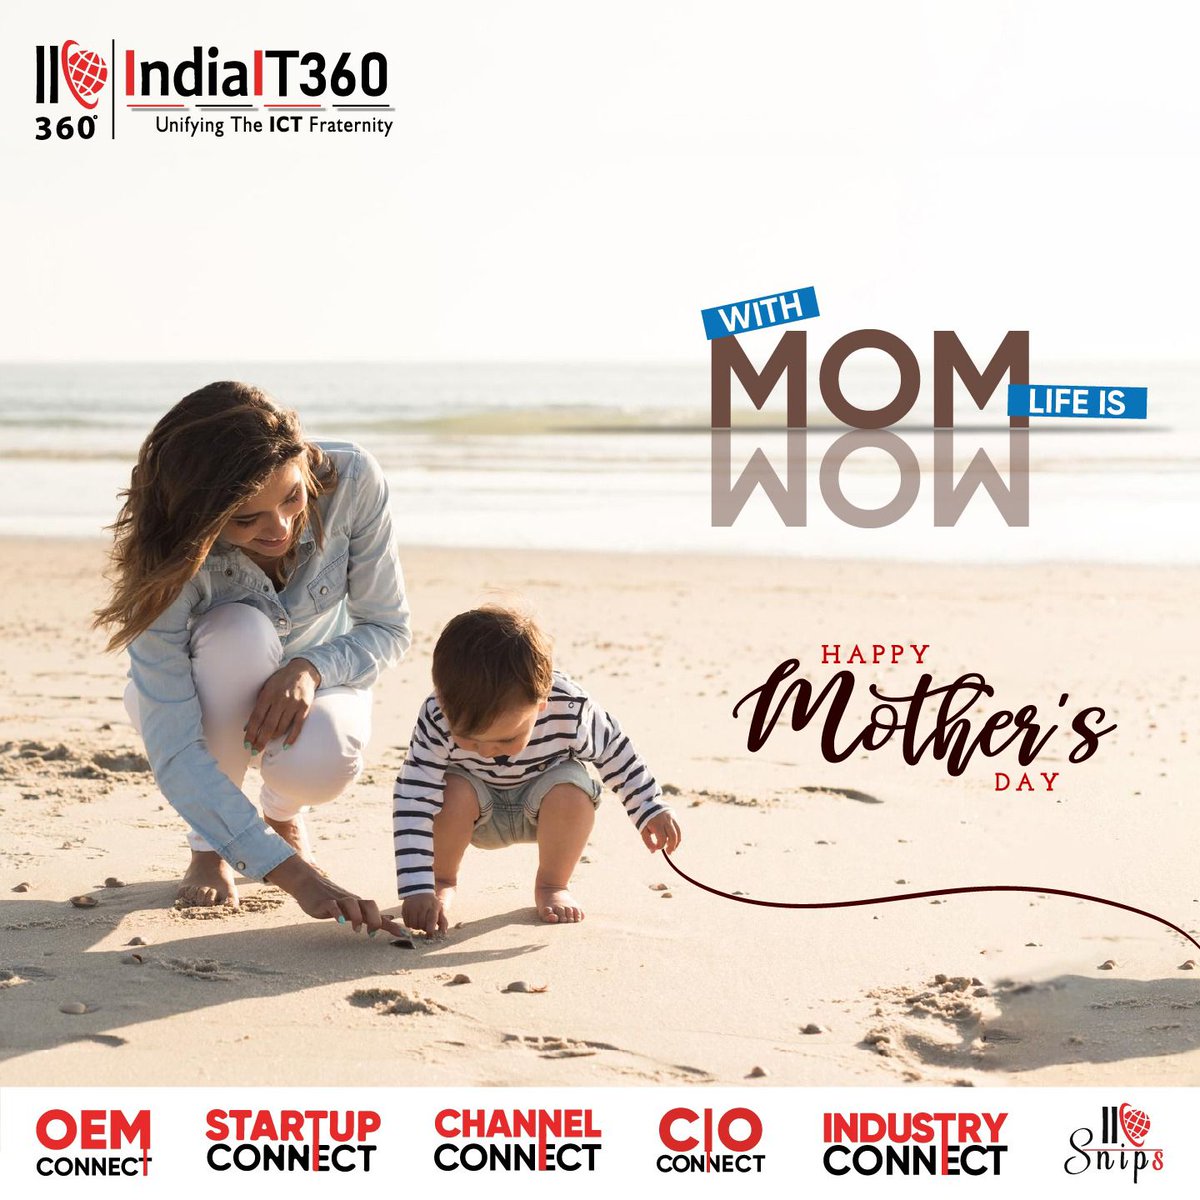 'A mother is she who can take the place of all others but whose place no one else can take.' - Cardinal Mermillod.
IndiaIT360 wishes our all-time great supporters a very Happy Mother's Day.
#MothersDay #MomLove  #Gratitude #LoveYouMom #BestMomEver #MomLife  #IndiaIT360